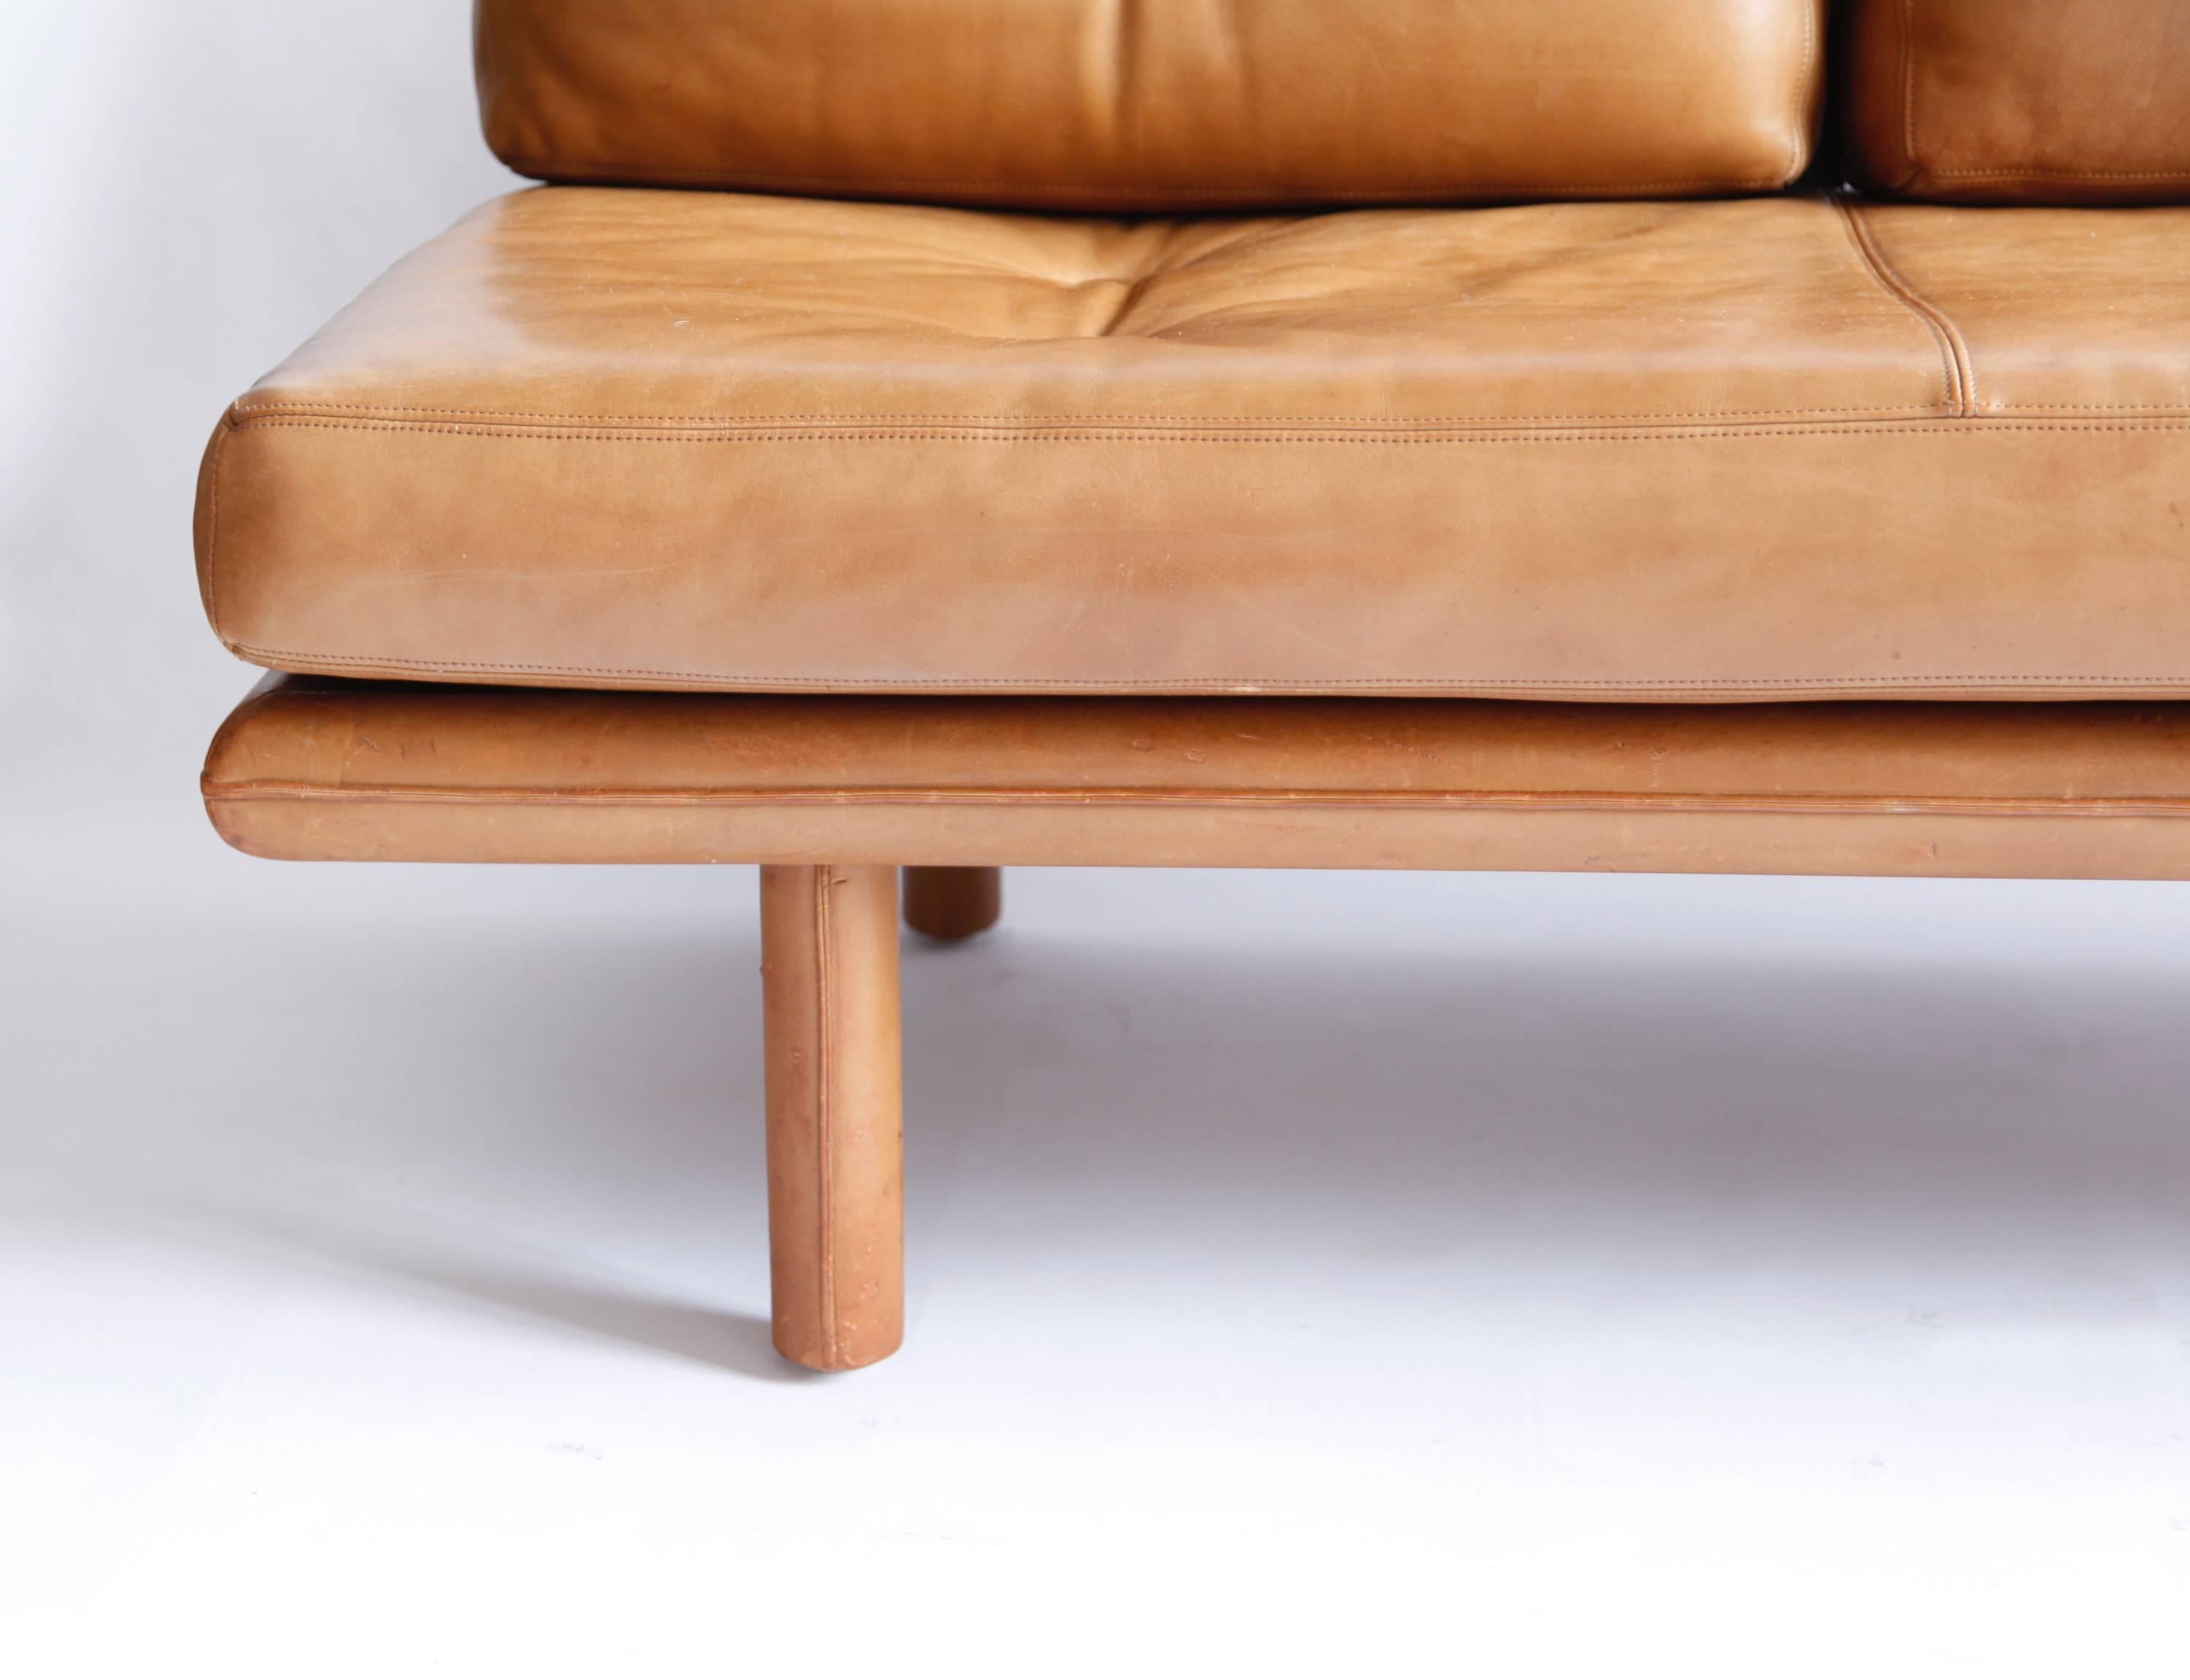 A simple and wonderful design from the 1960s produced by Kill International, a furniture maker of outstanding quality. Three leather cushions can be removed to form a very comfortable single bed. Base and legs are wrapped in leather also. All